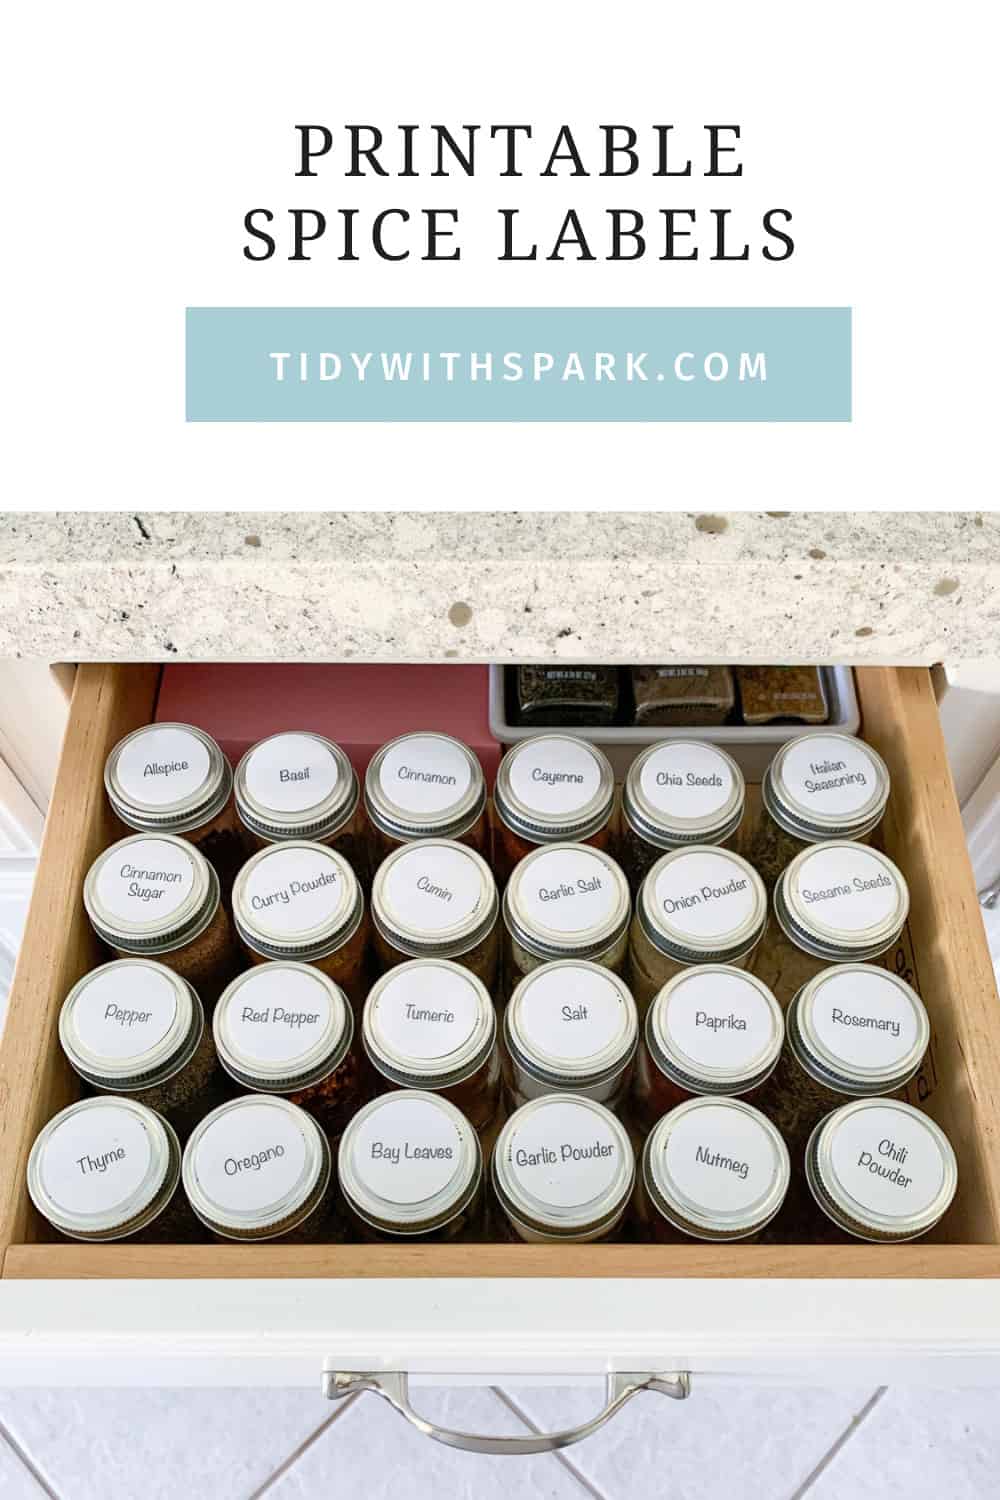 https://tidywithspark.com/wp-content/uploads/2021/10/Tidy-with-Spark-Printable-Spice-Labels.jpg